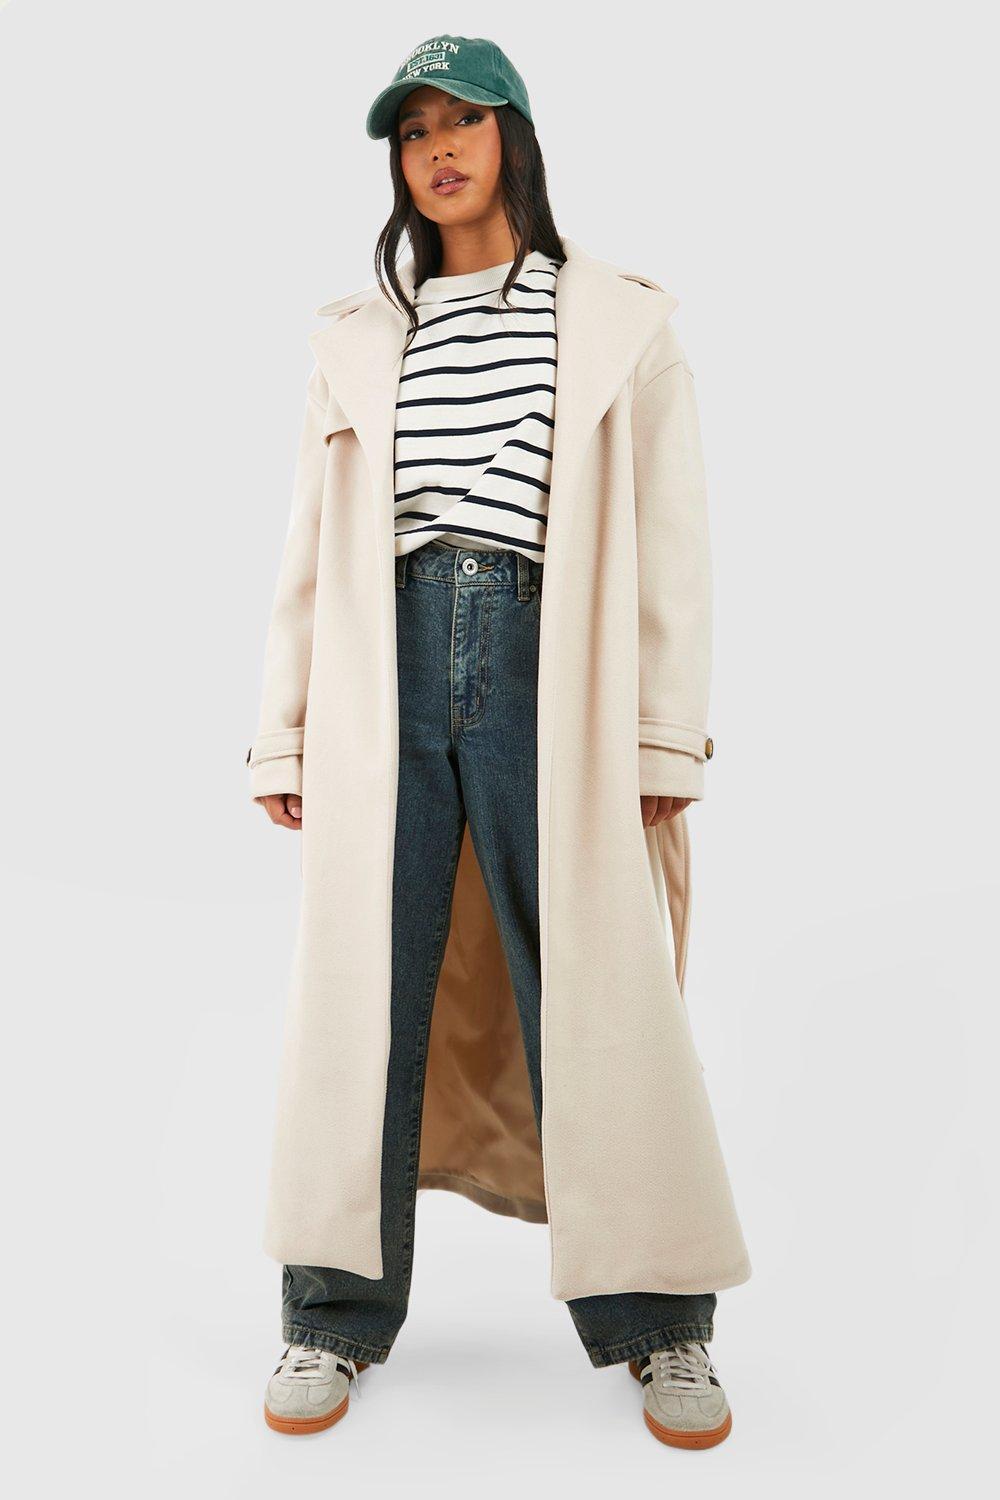 Boohoo Petite Wool Look Oversized Trench Coat in Natural | Lyst UK